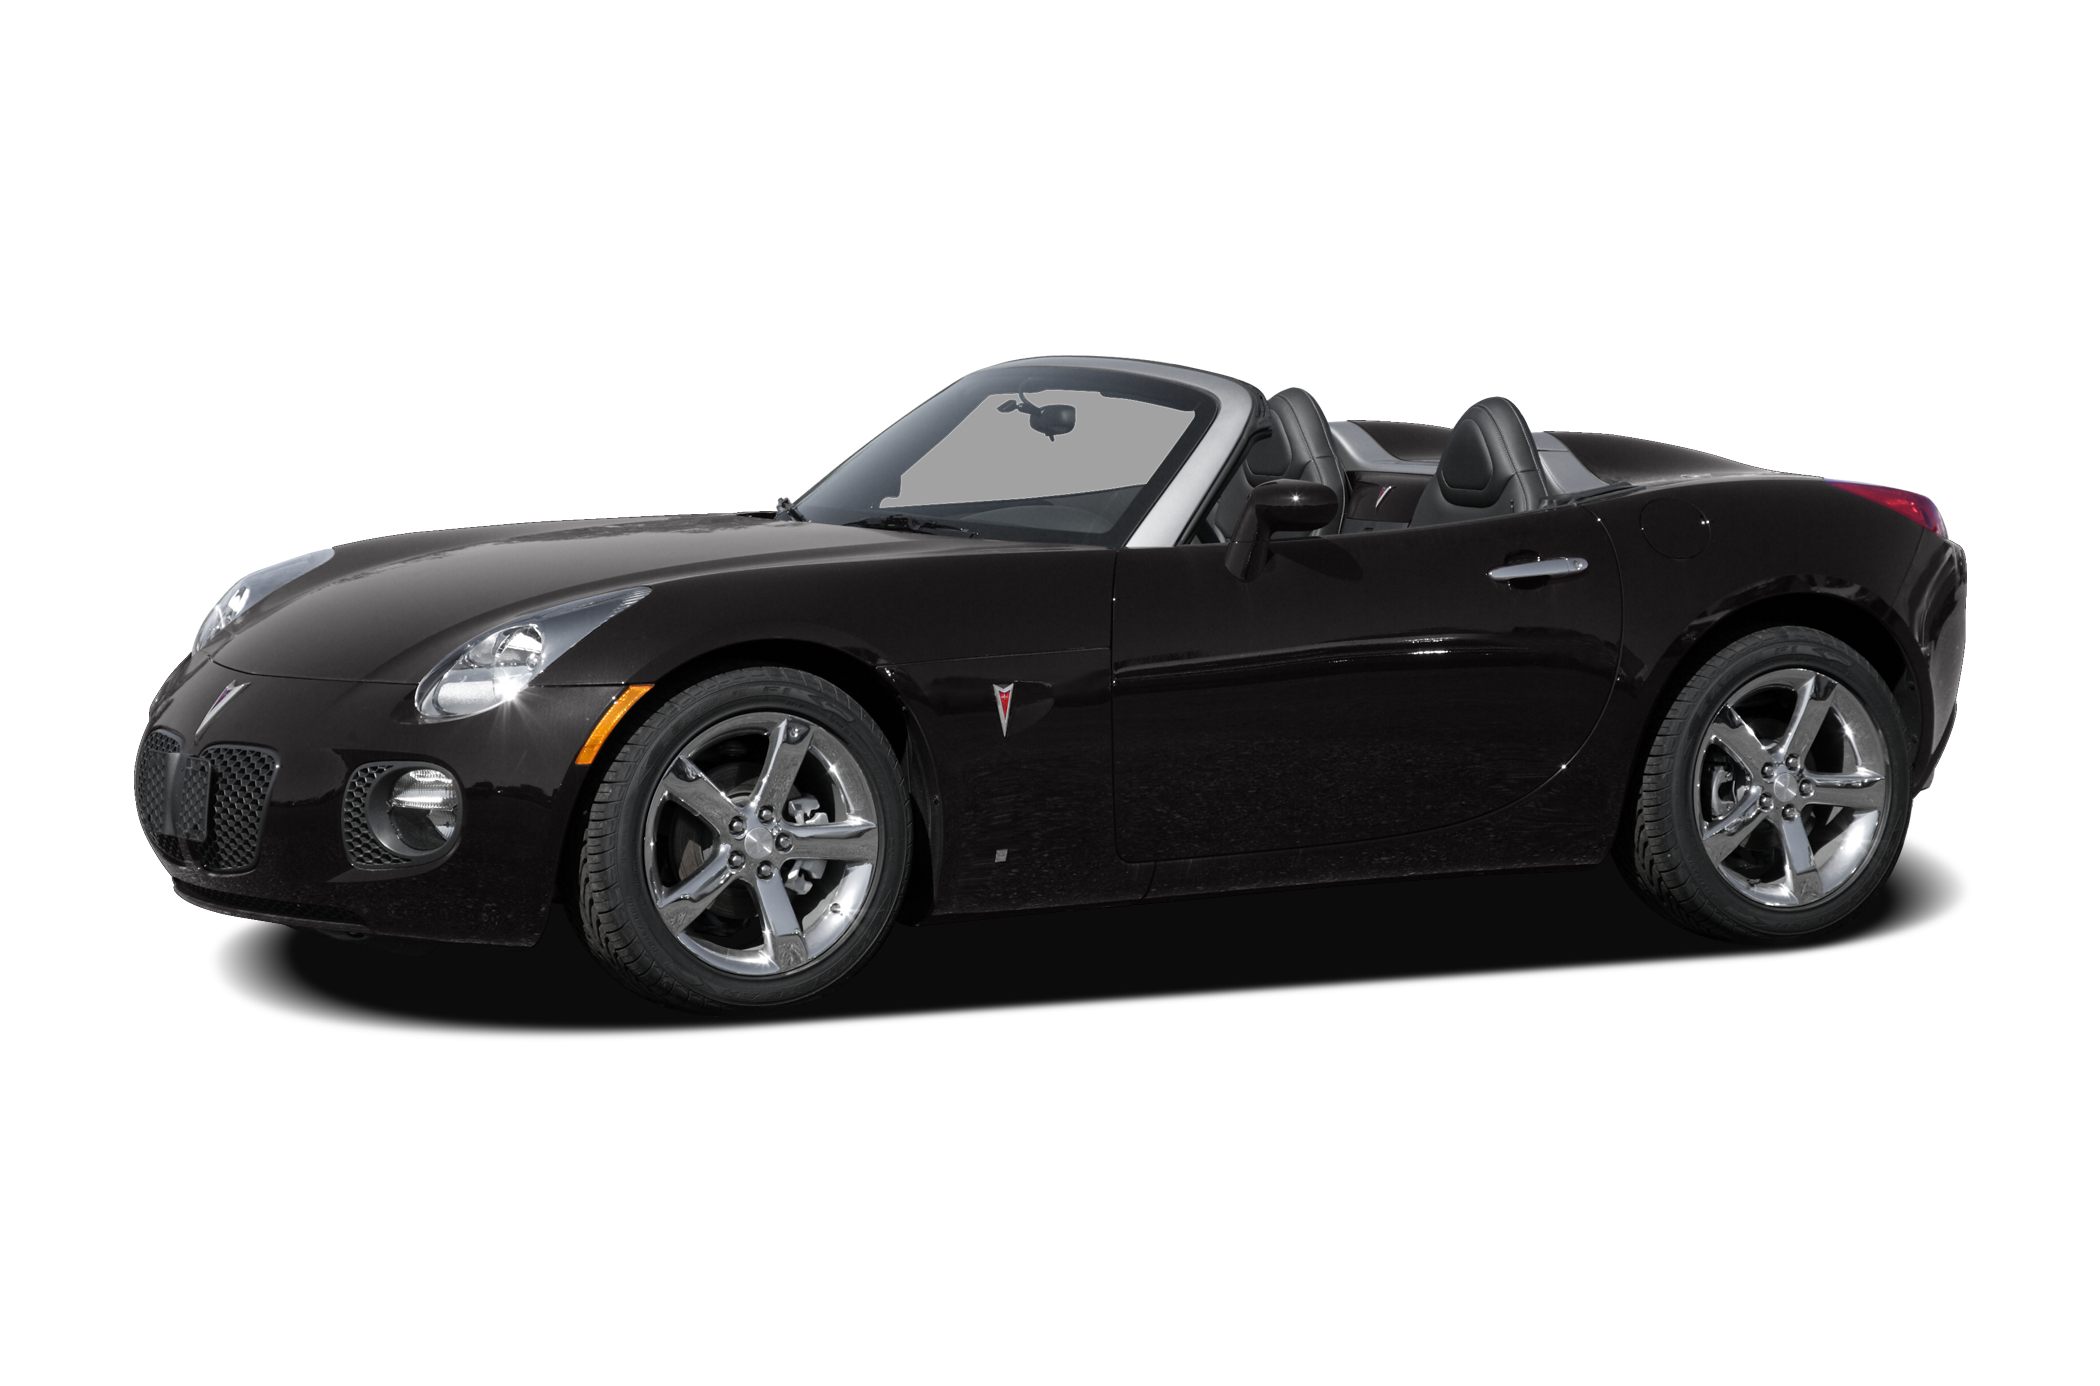 2009 Pontiac Solstice Gxp 2dr Convertible Specs And Prices